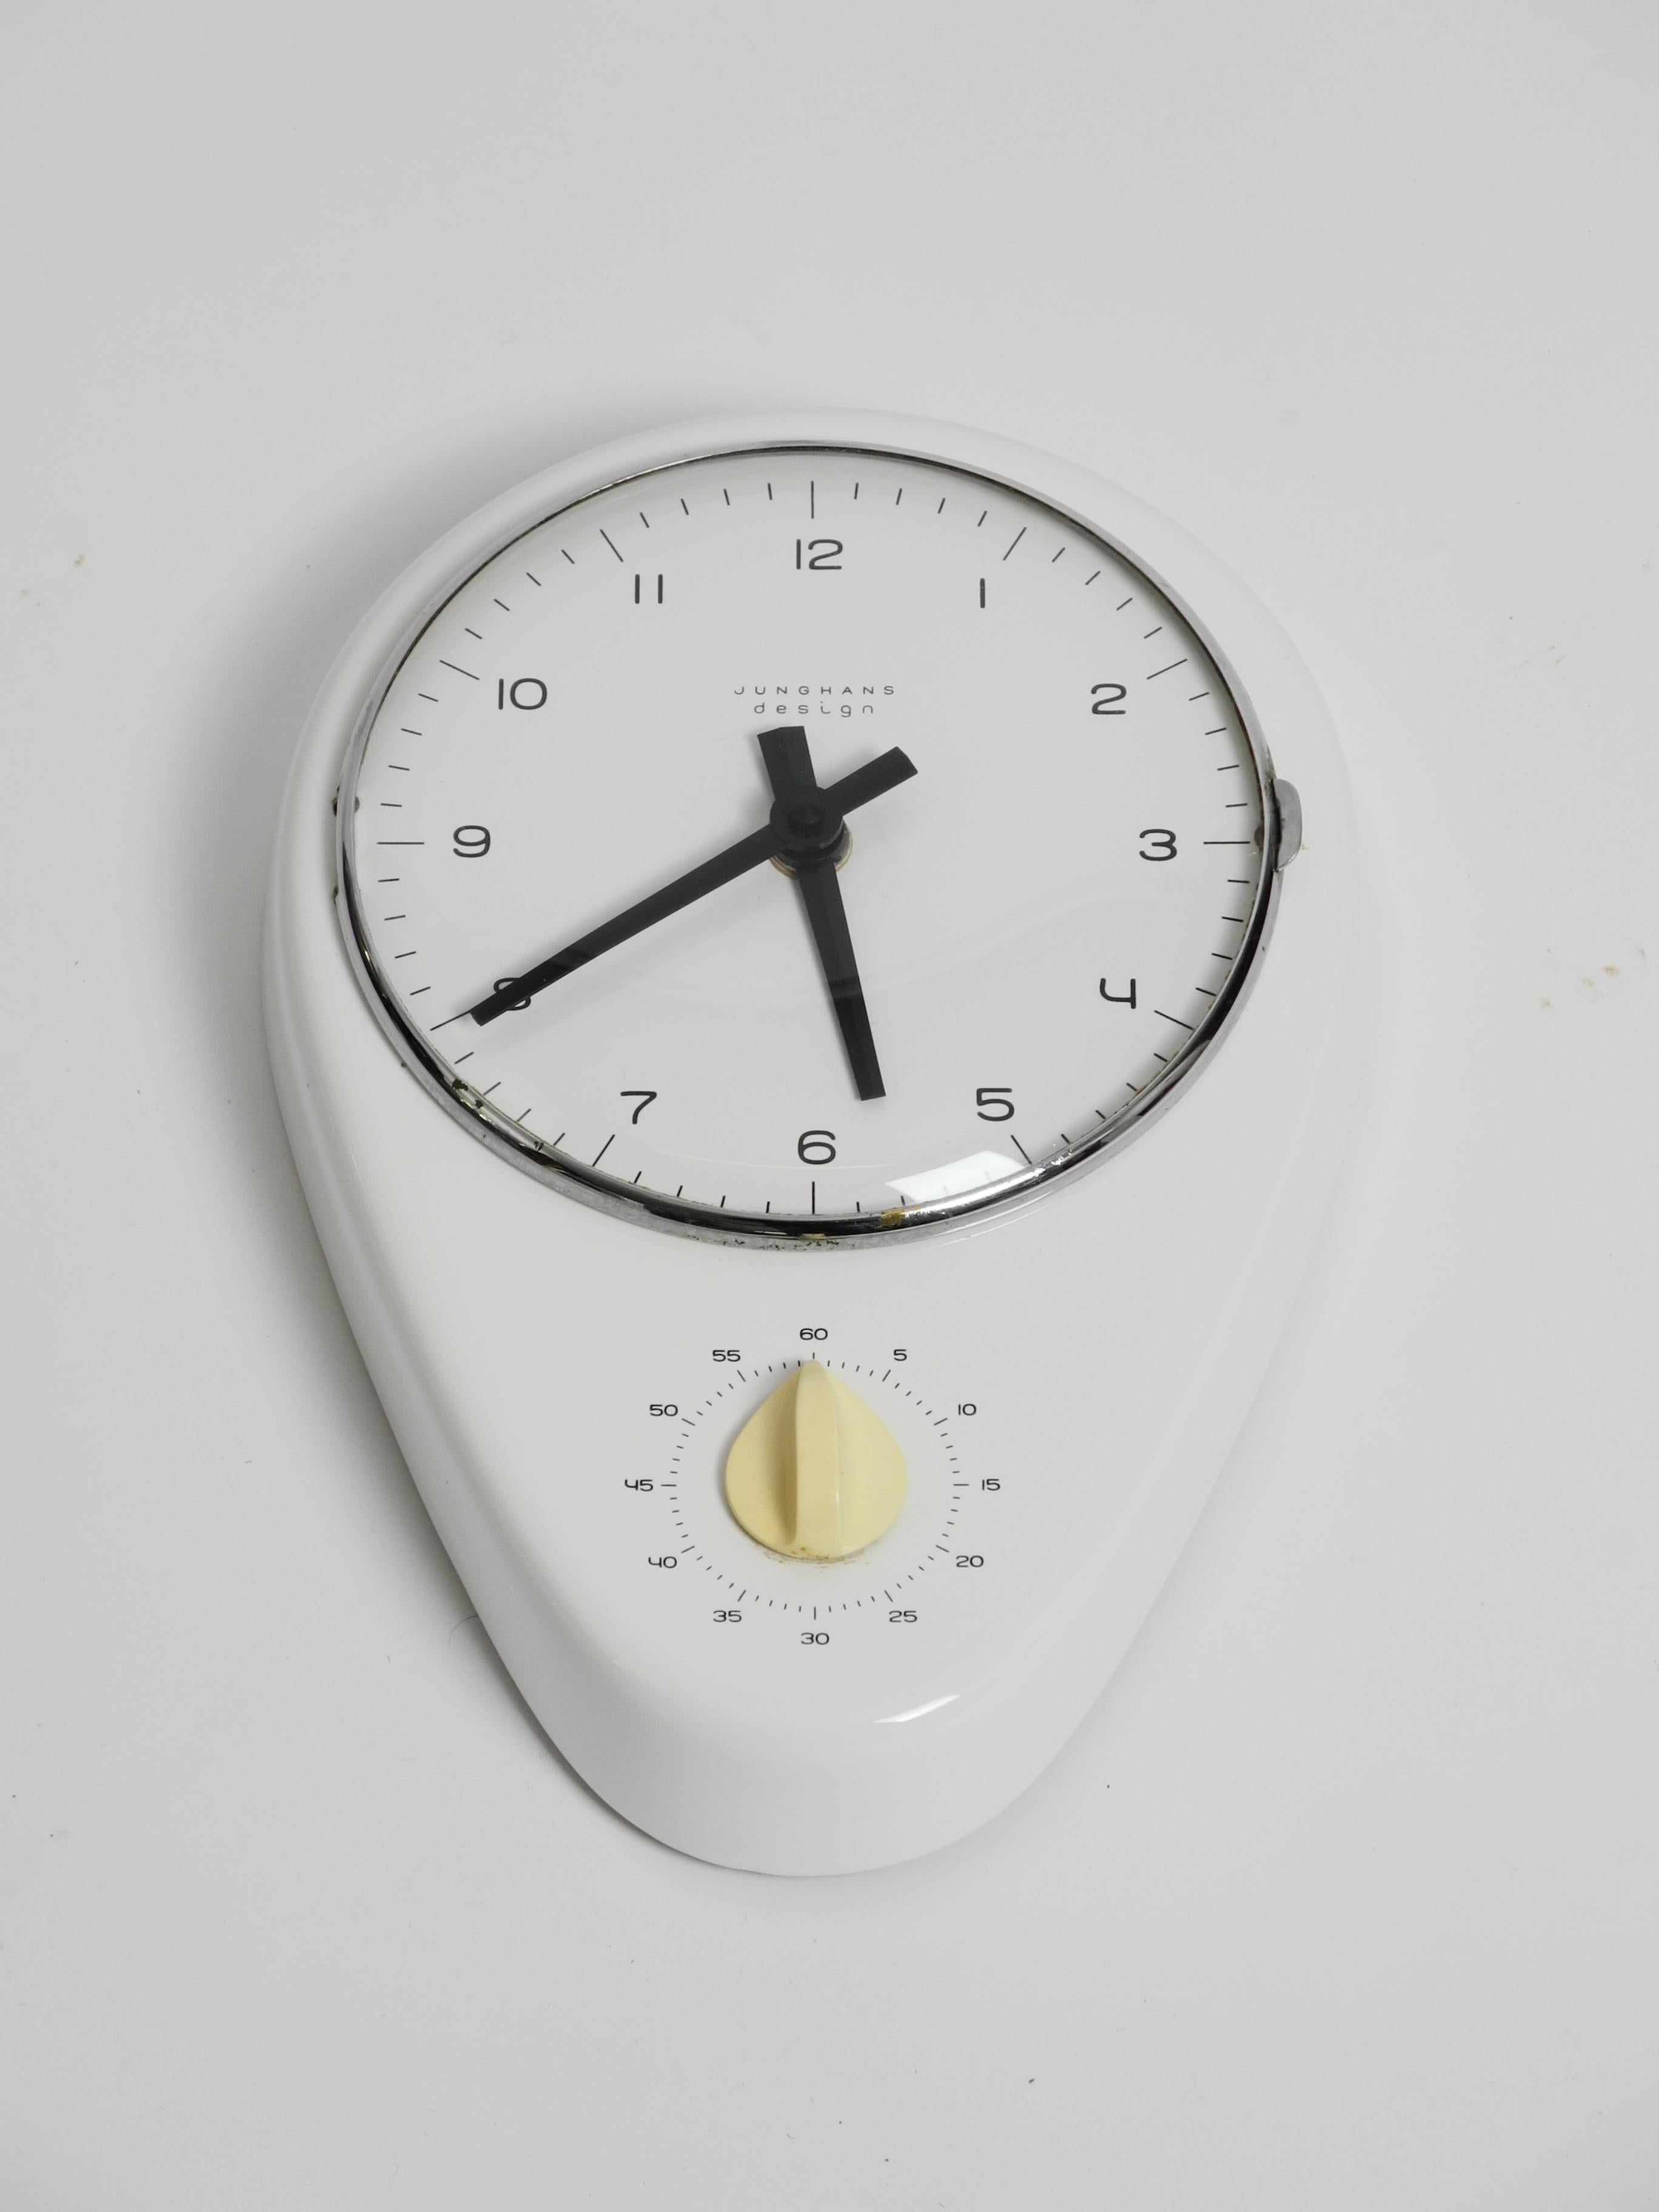 Iconic wall clock and timer by Max Bill for Junghans Germany, 1960s. With chrome framed removable glass cover. Signed with printed manufacturer's mark to face and impressed manufacturer's mark to reverse: RD Eng Nr. 886824 and 330/1.
Powered by its